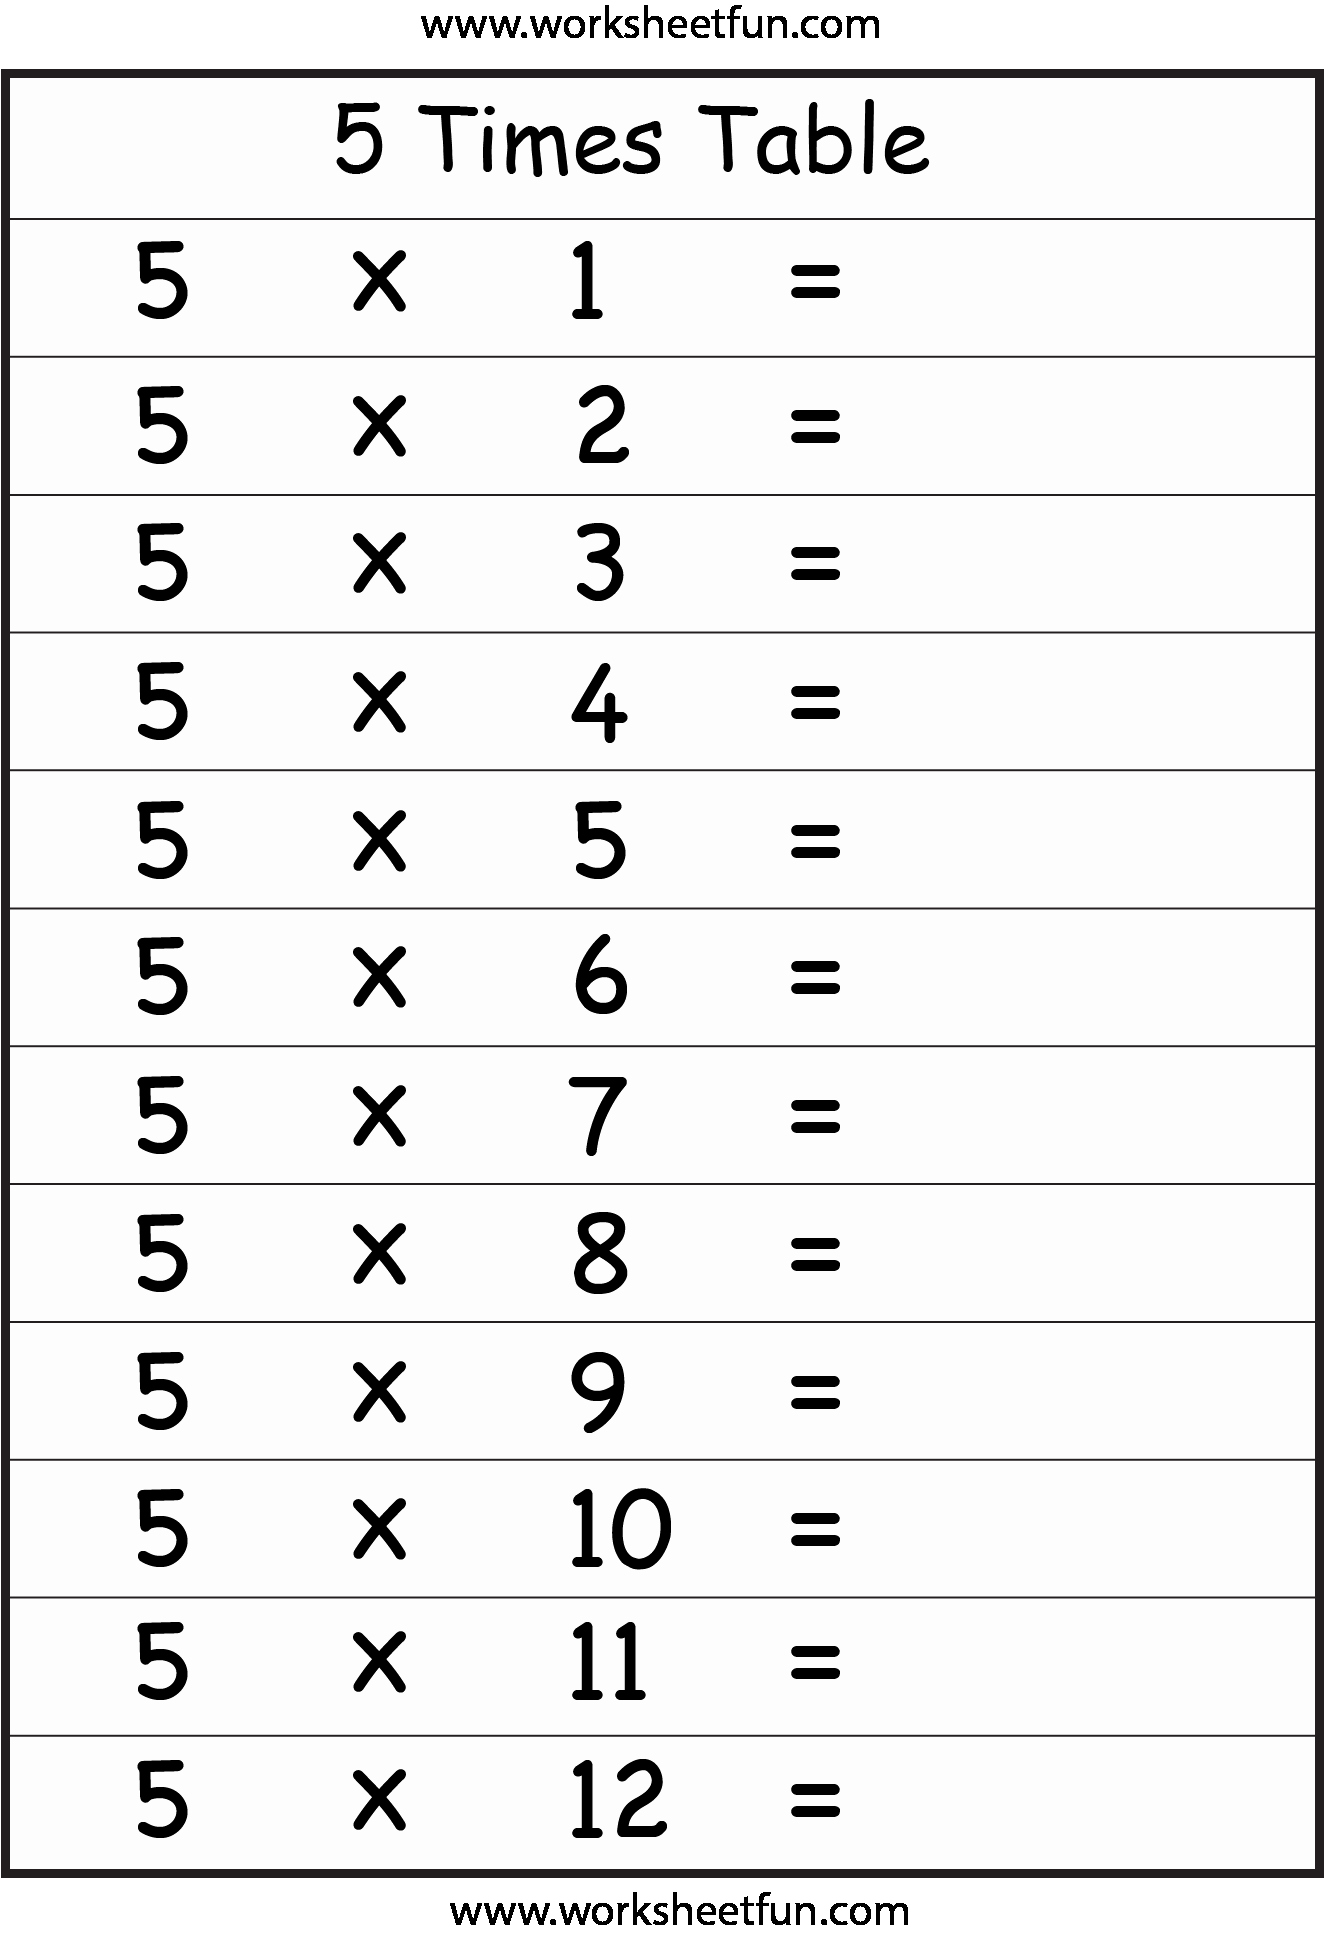 Free Printable Times Tables Awesome Multiplication Times Tables Worksheets – 2 3 4 5 6 7